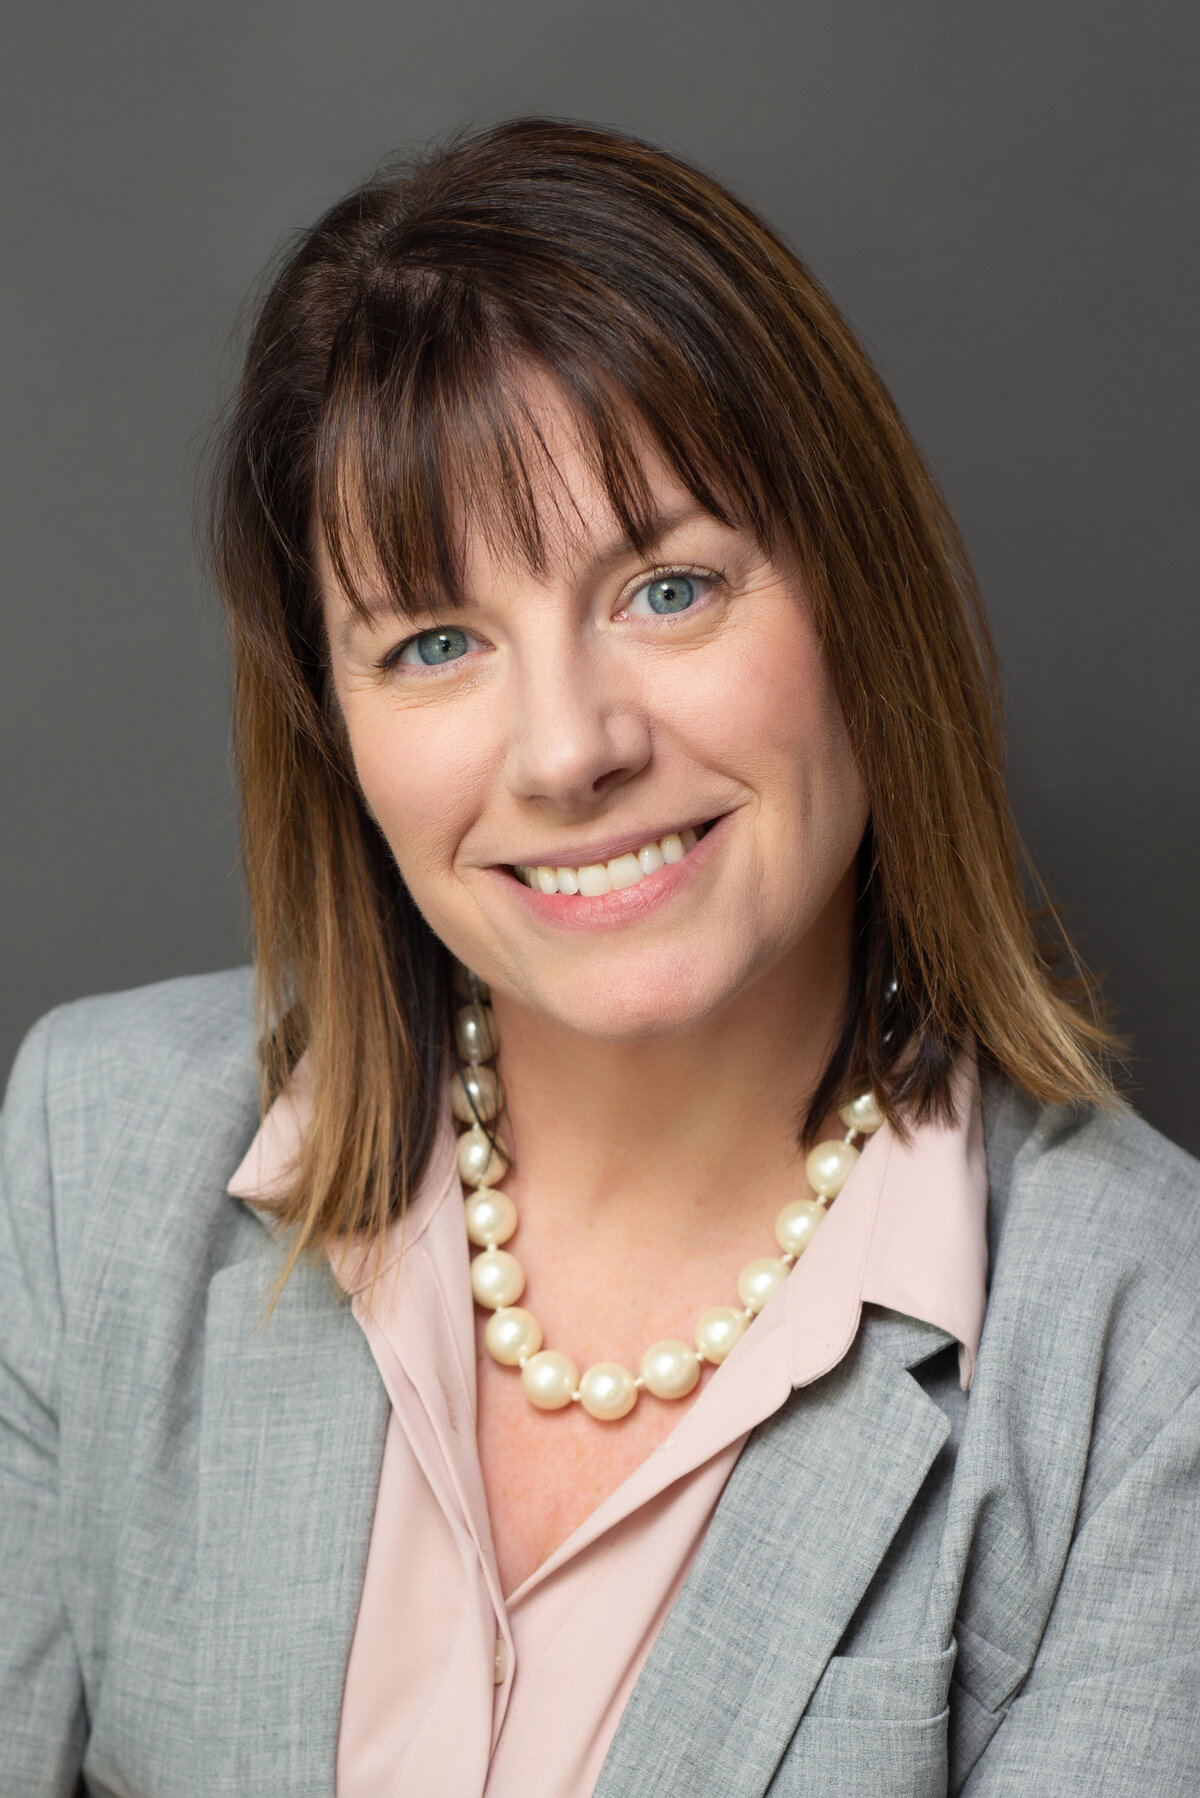 Professional Headshot of Woman in Insurance